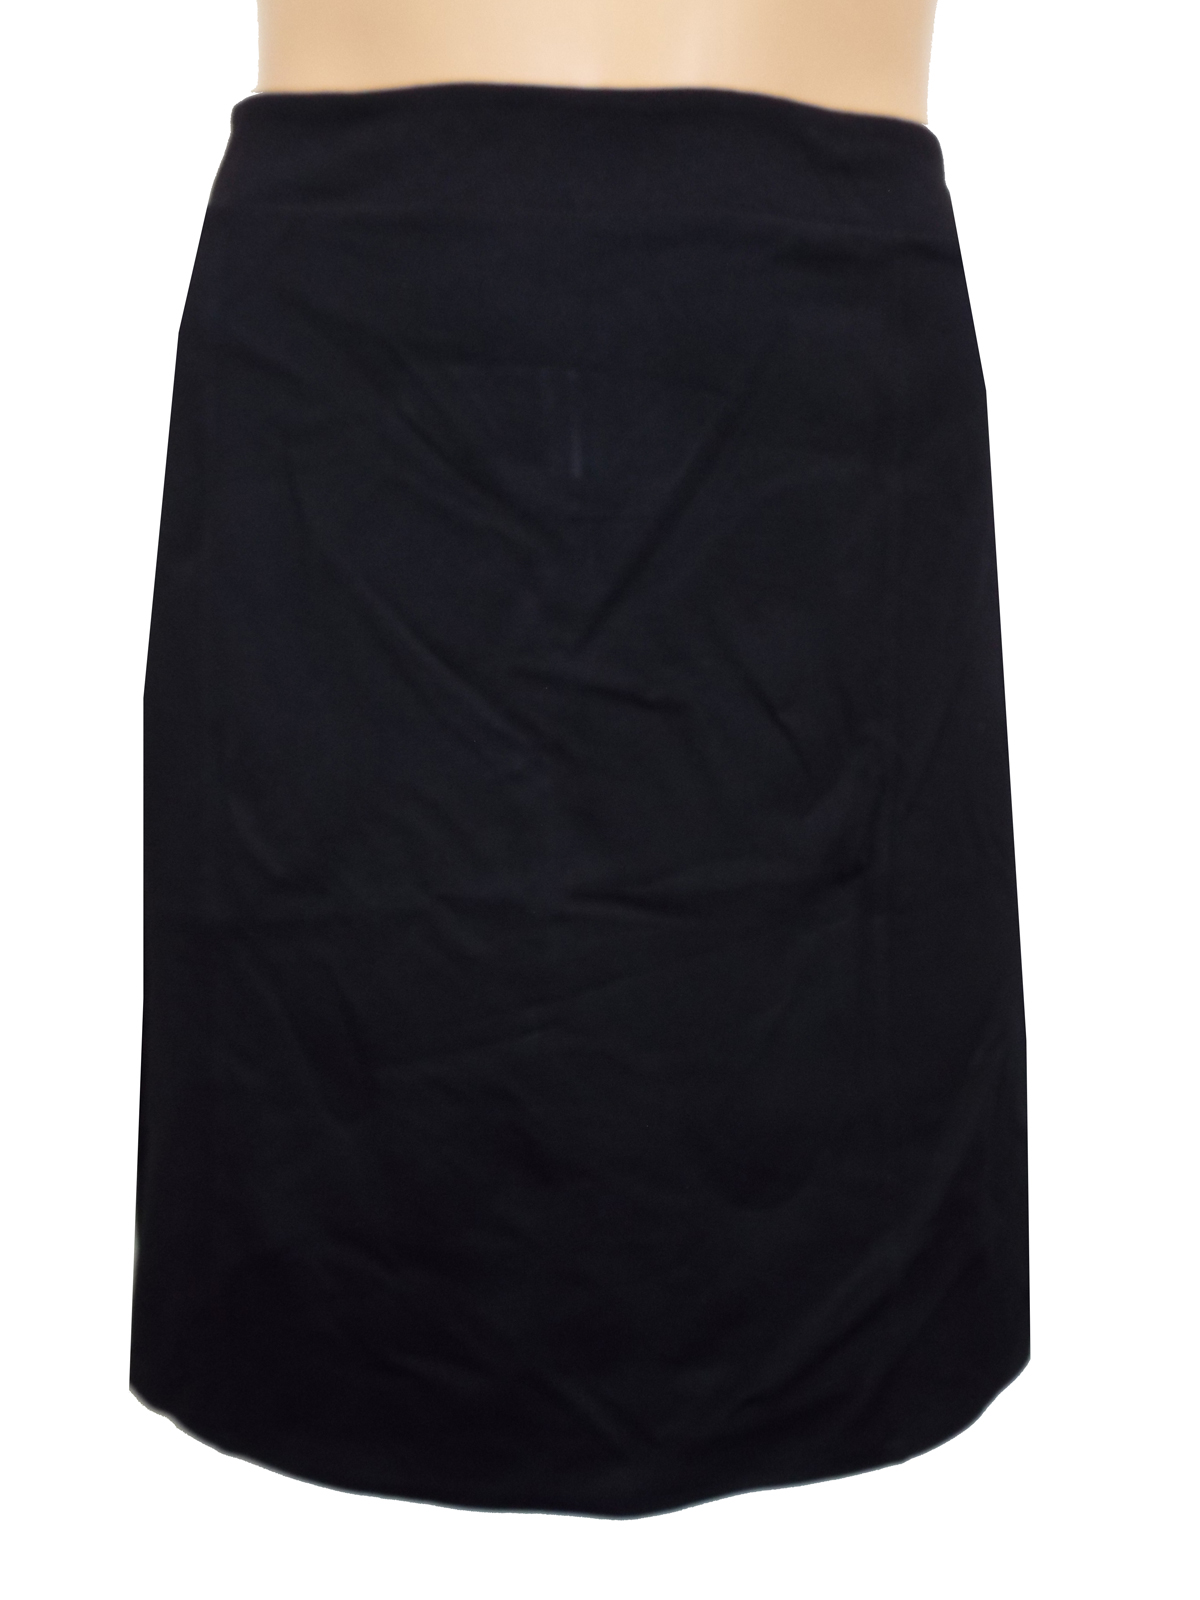 M0nsoon ASSORTED Ladies Skirts - Plus Size 16 to 22